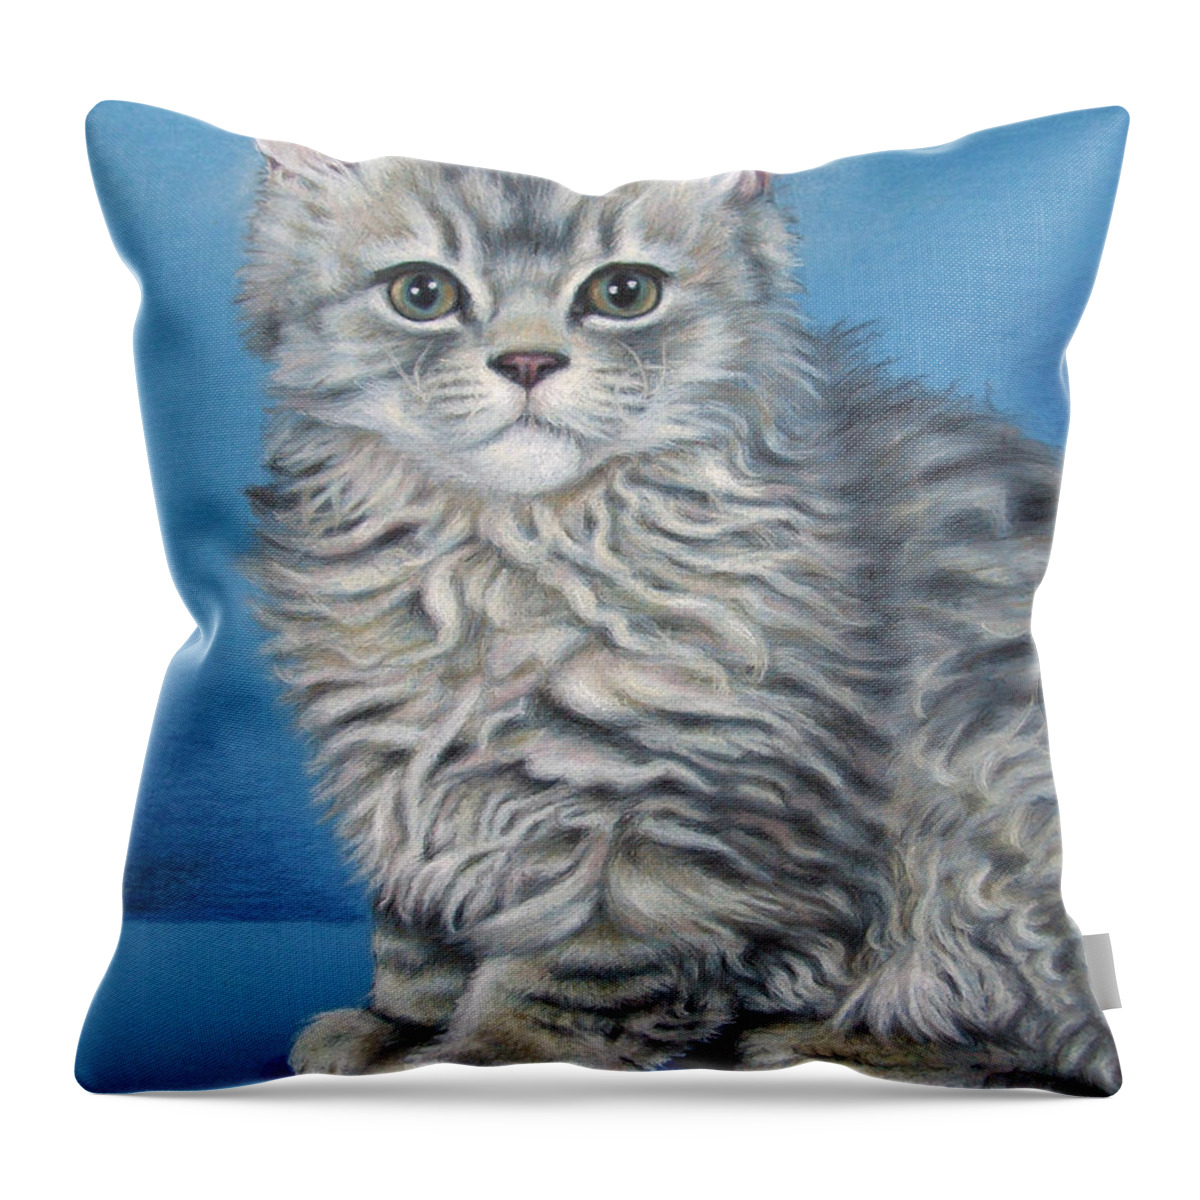 Cat Throw Pillow featuring the drawing Velvet Kitten by Nicole Zeug